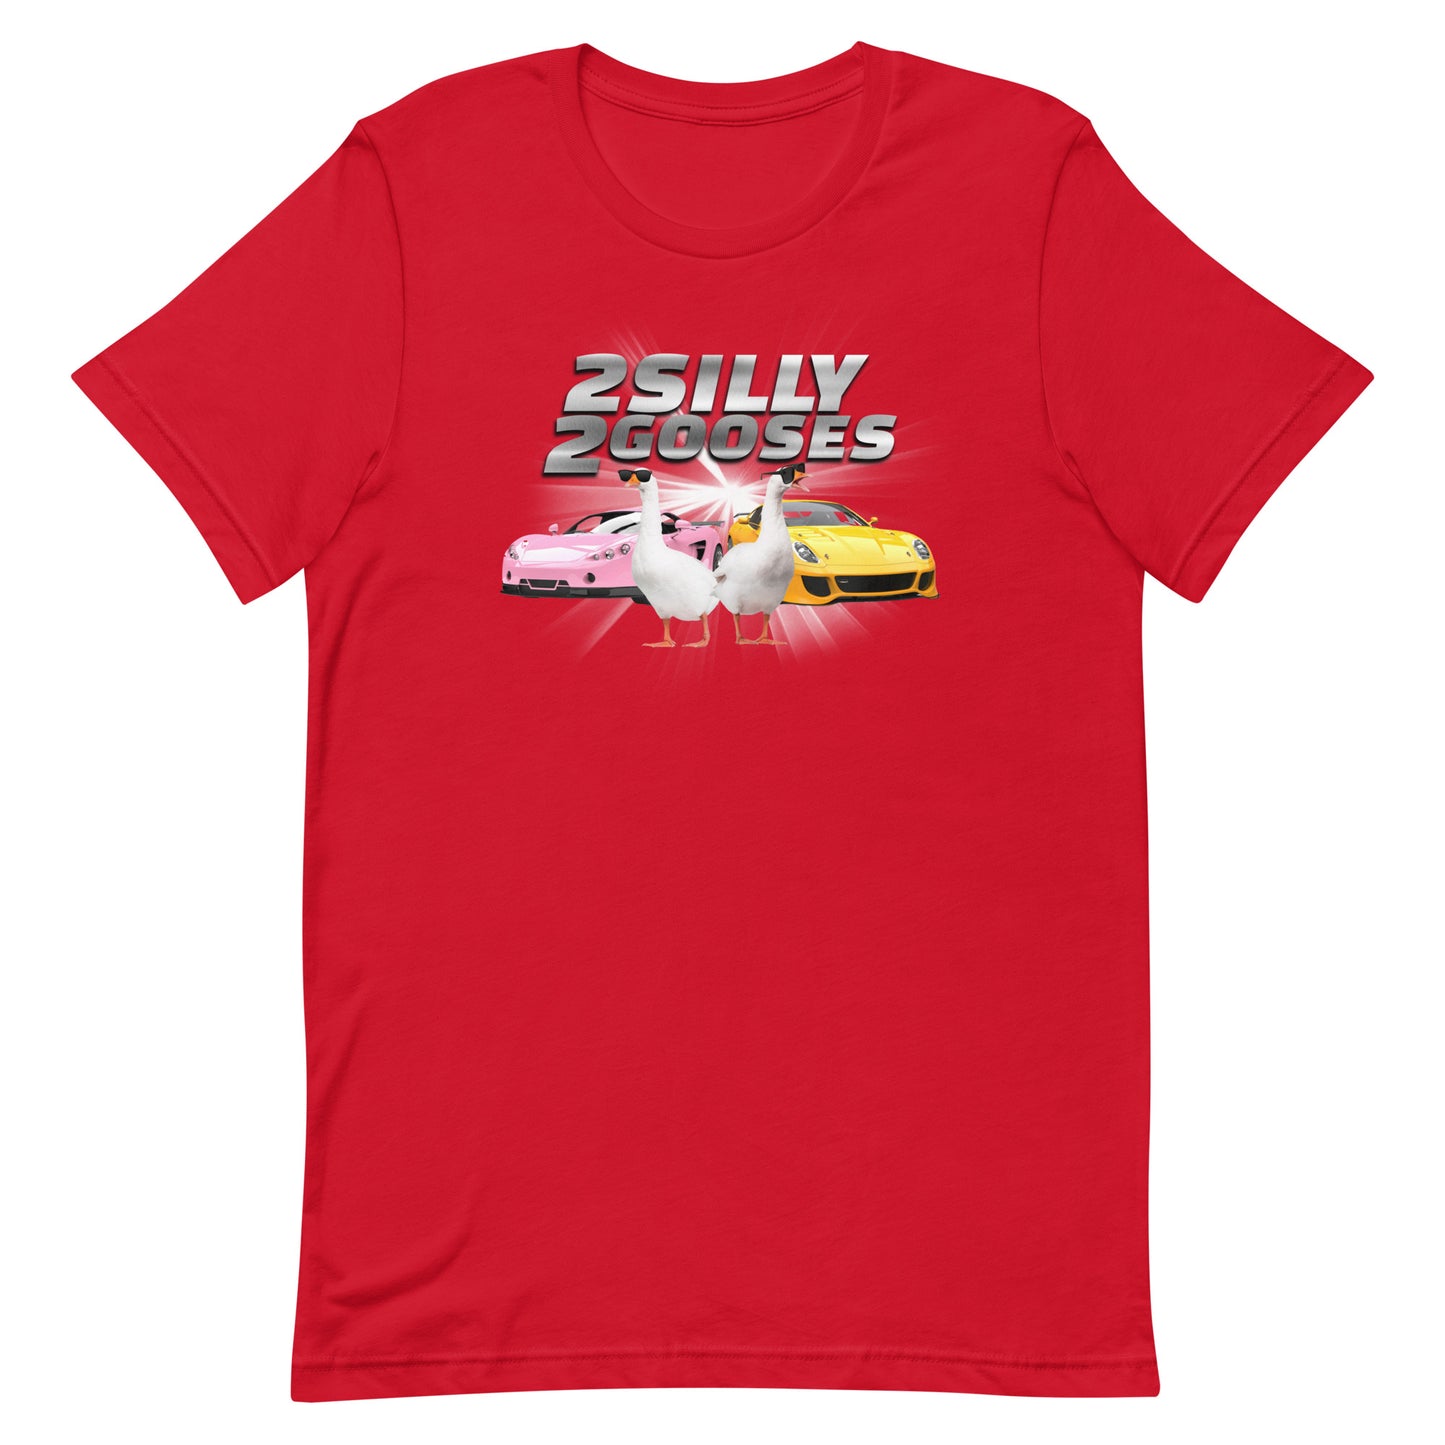 2 Silly 2 Gooses Unisex t-shirt